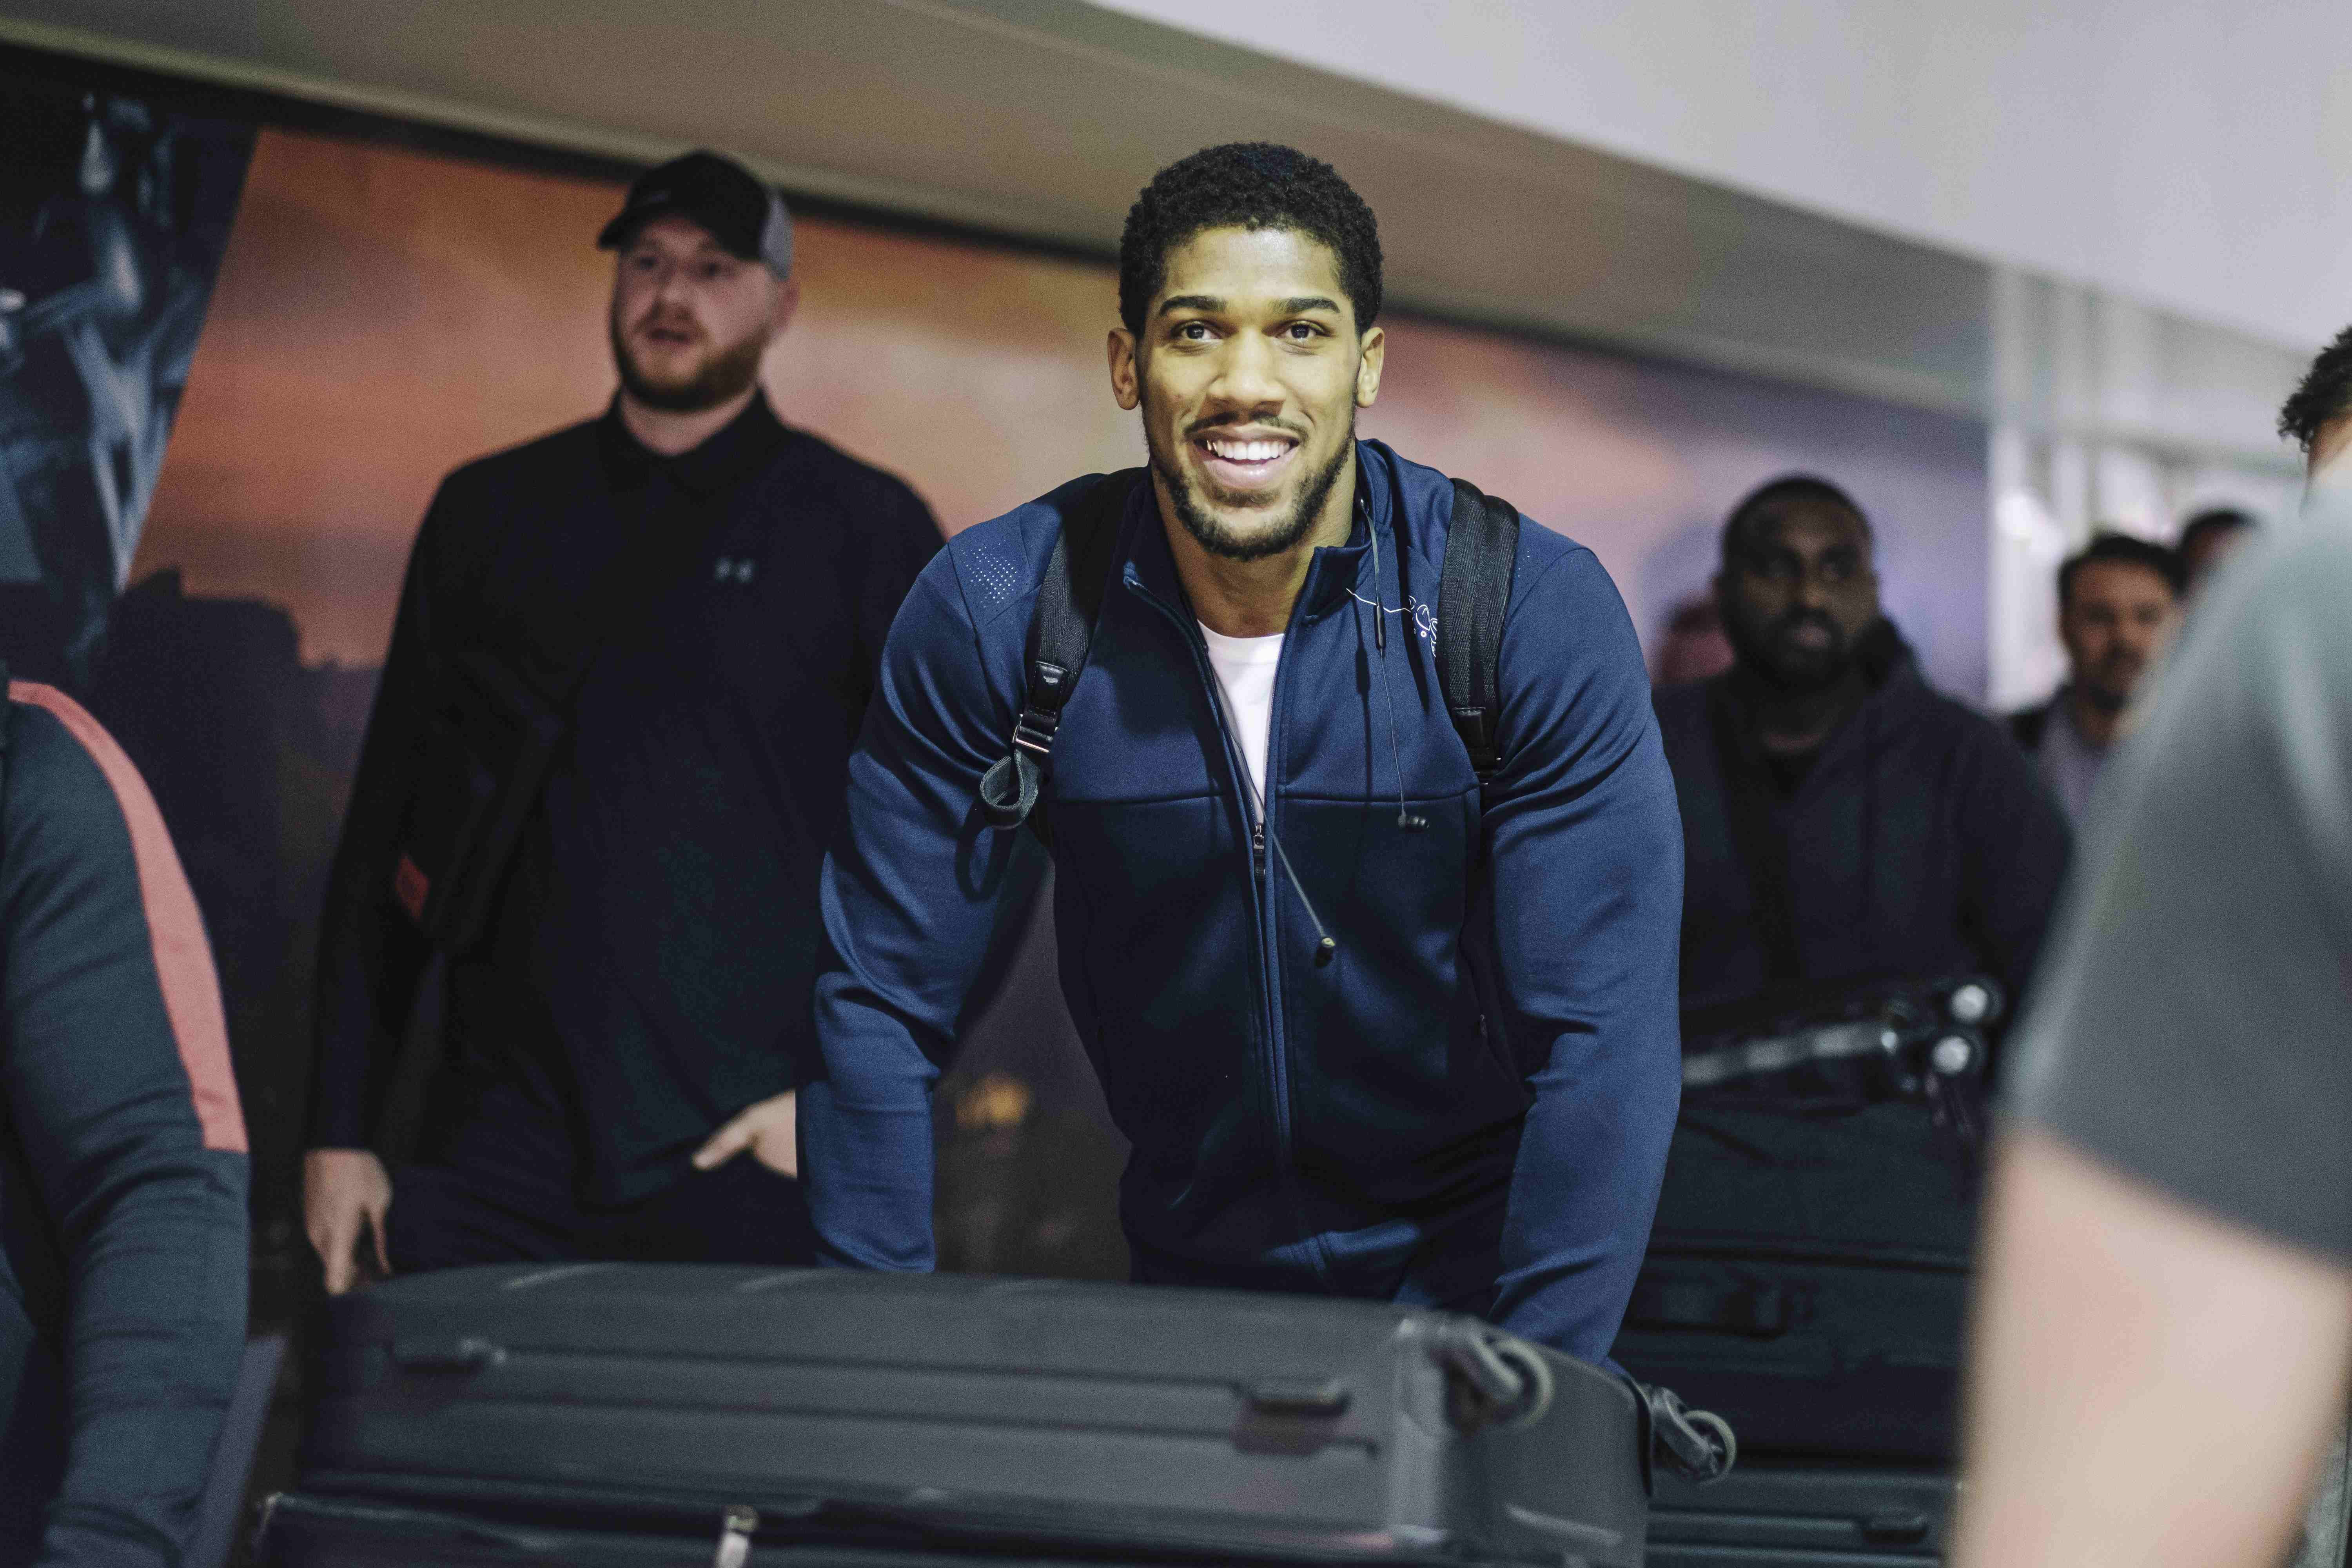 Joshua arrived in relaxed mood in Saudi Arabia ahead of his colossal rematch Credit: Diriyah Season